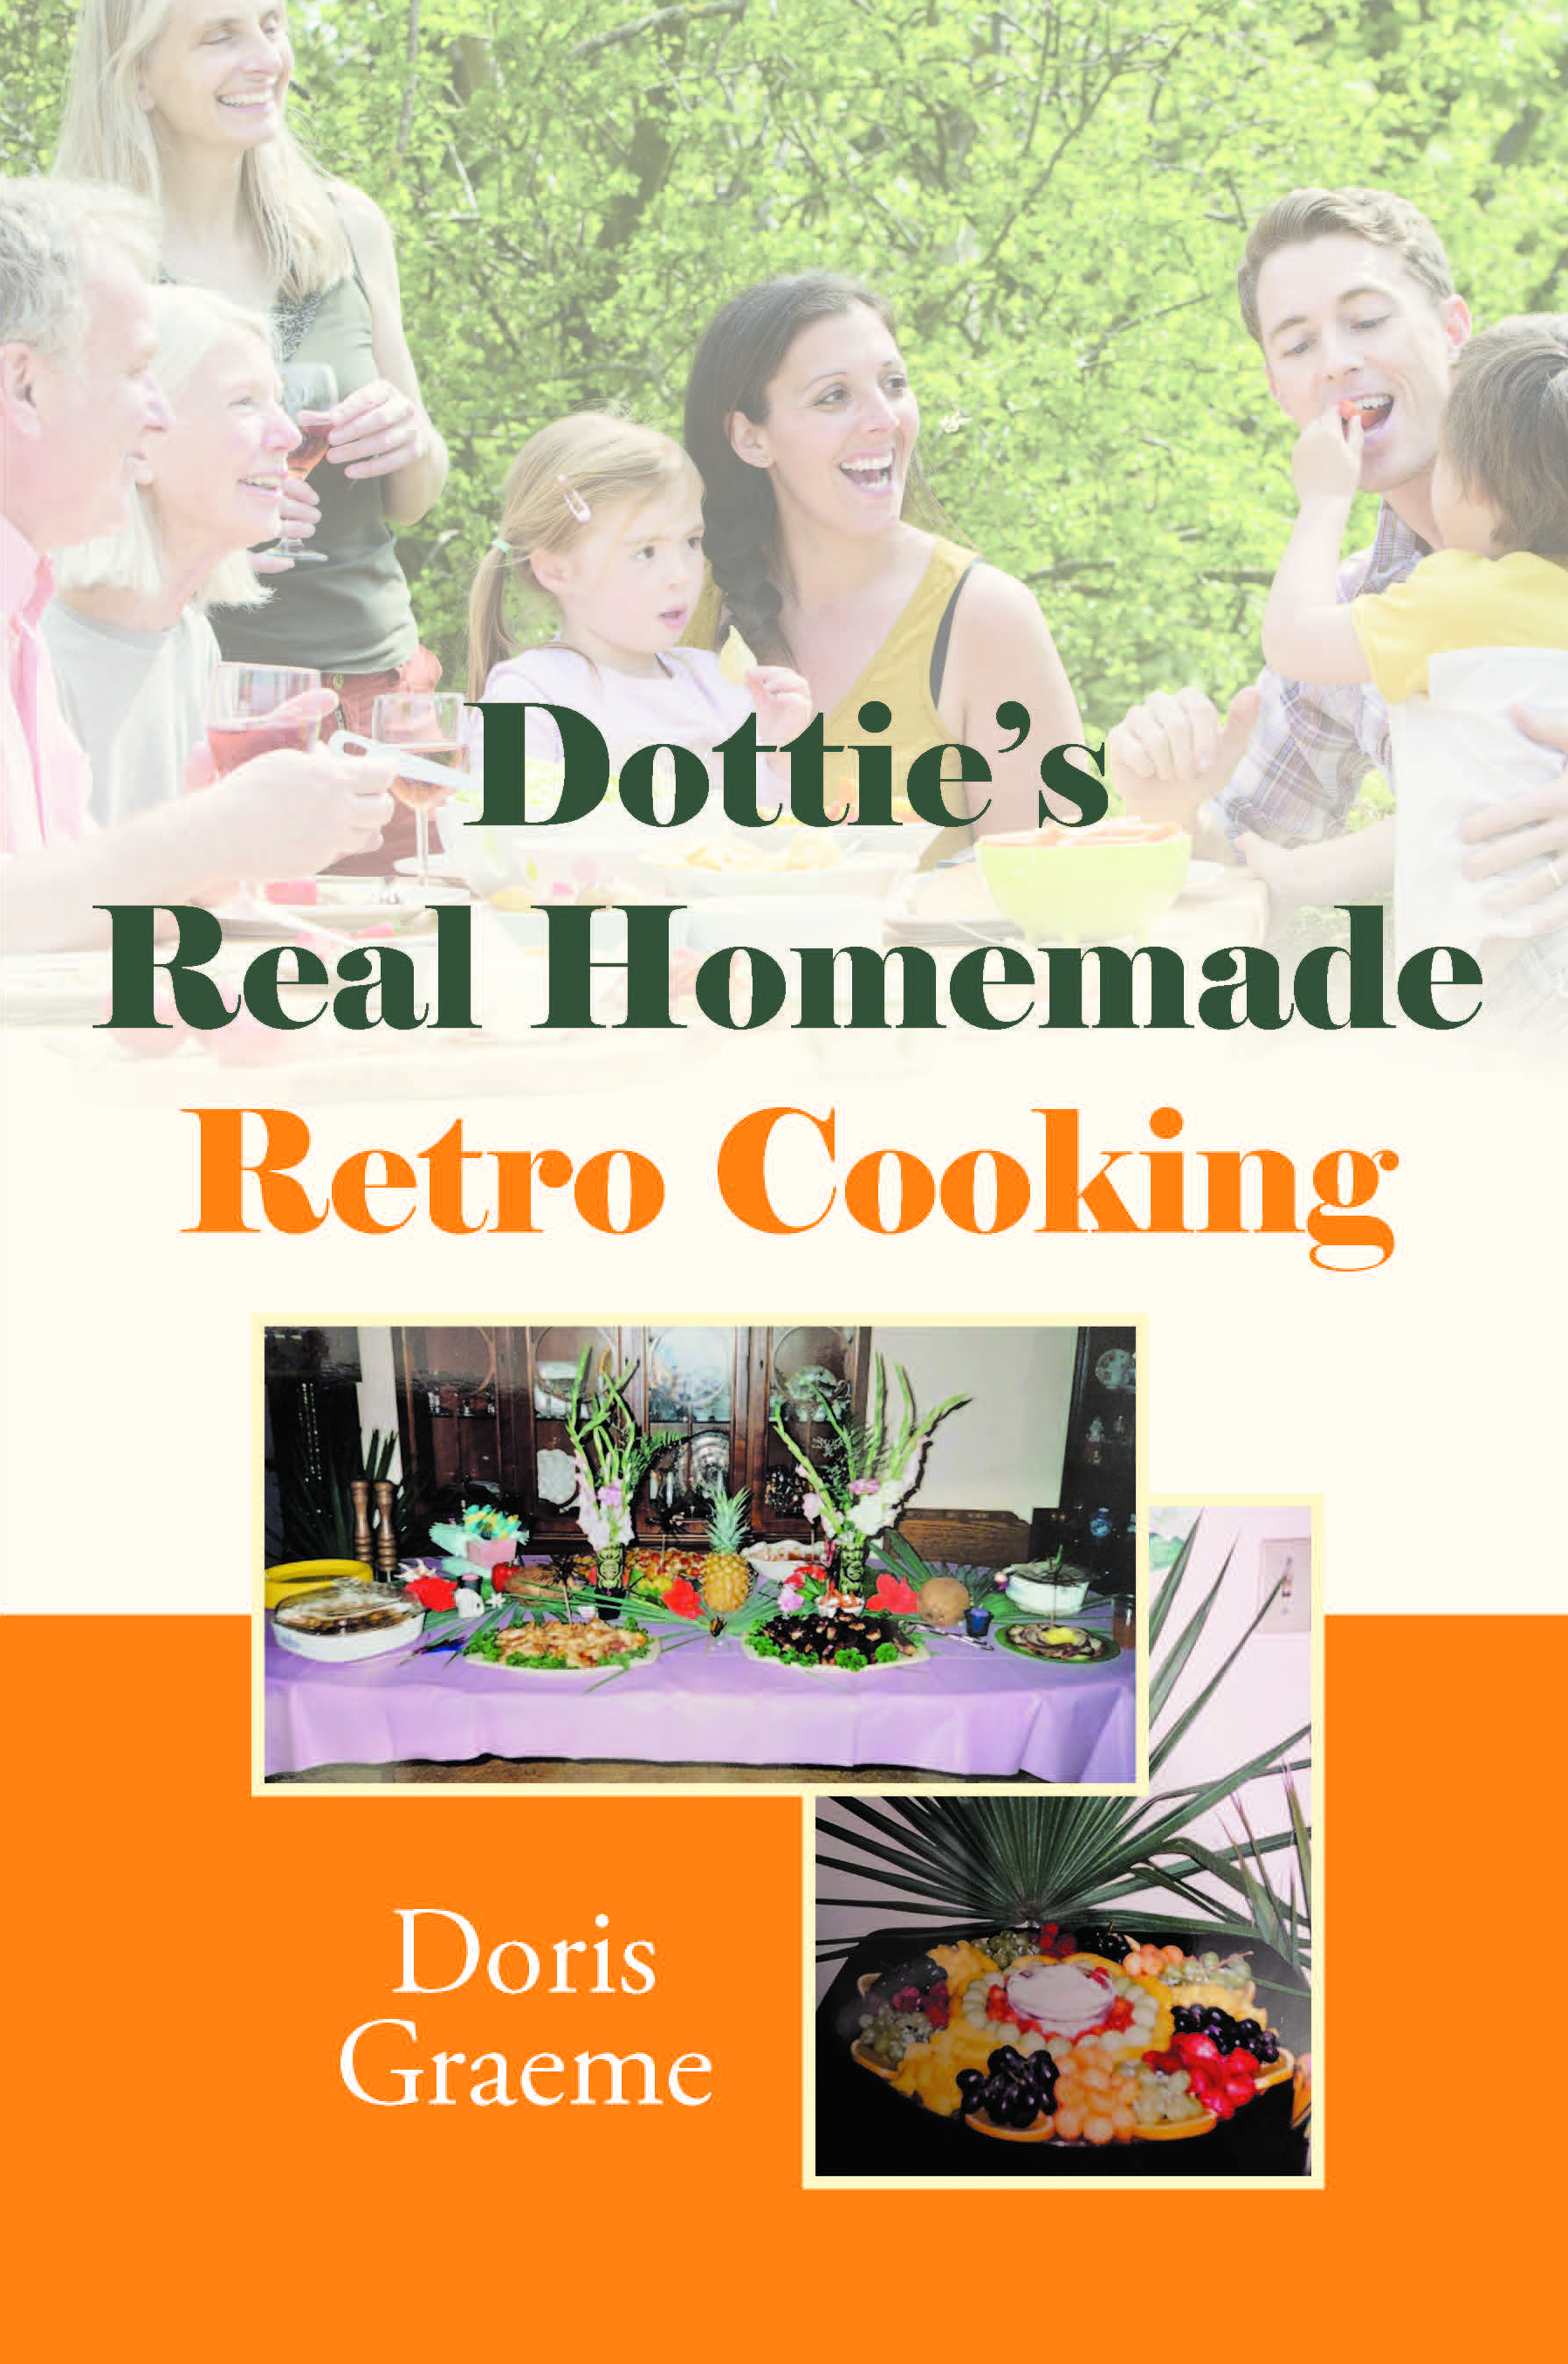 Doris Graeme’s New Book, "Dottie's Real Homemade Retro Cooking," is a Collection of Delicious and Inspired Recipes That Are Sure to Delight All Readers